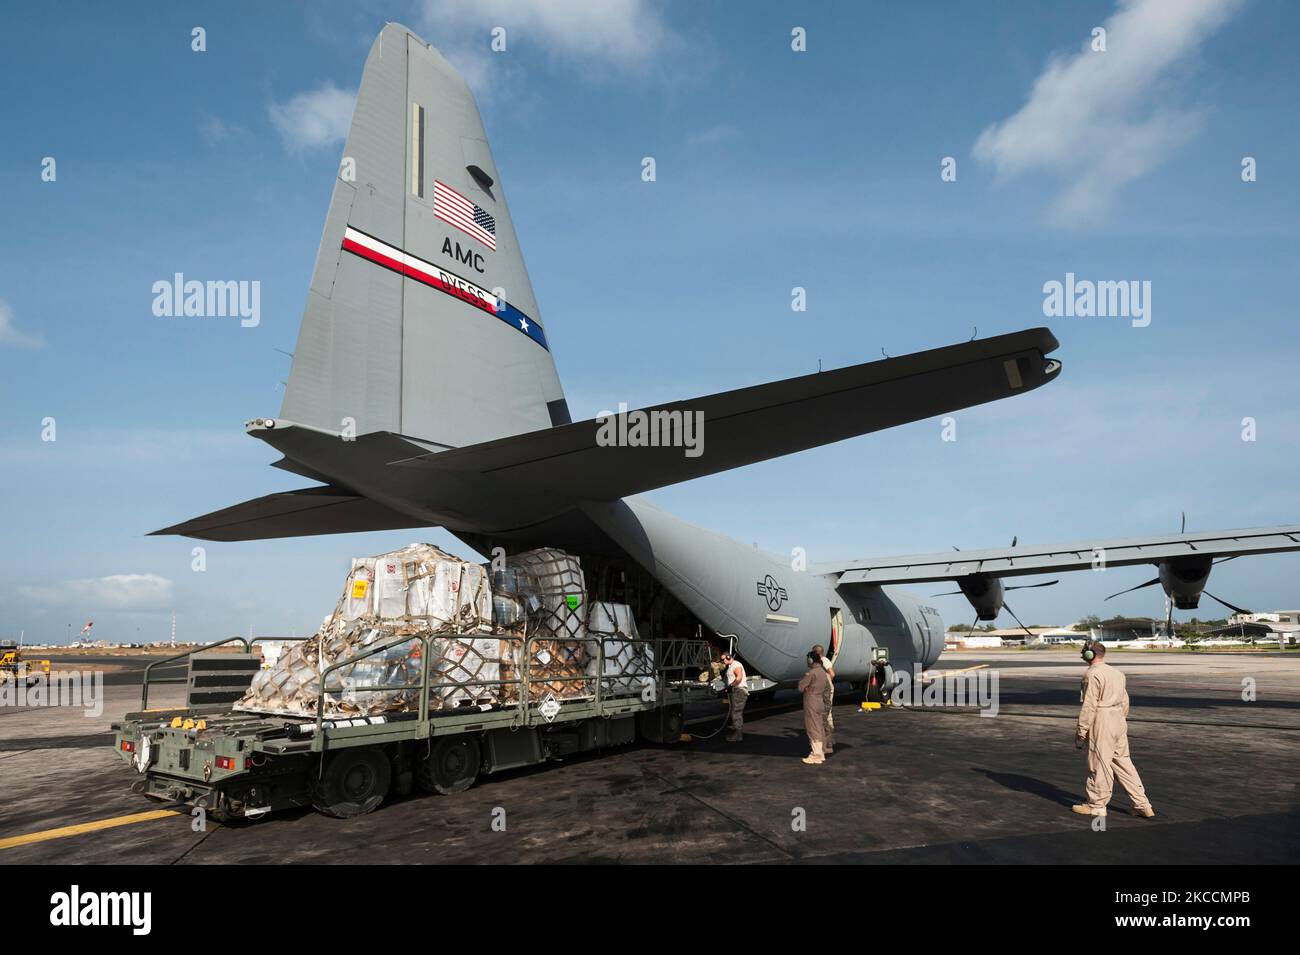 Aerial porters load supplies on a C-130 aircraft. Stock Photo